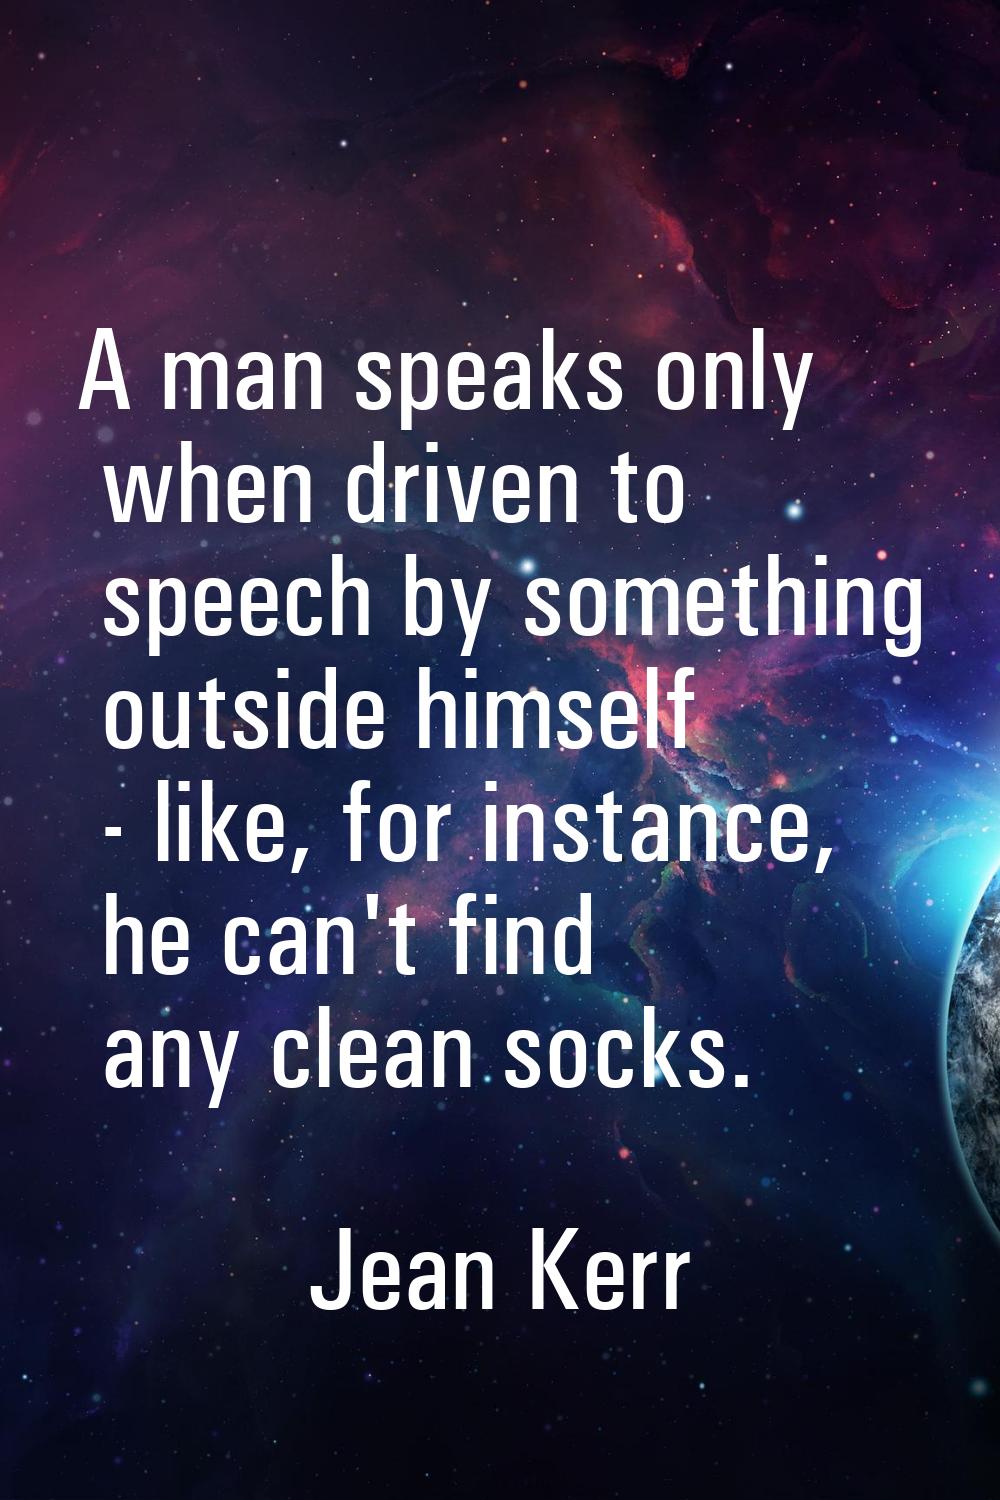 A man speaks only when driven to speech by something outside himself - like, for instance, he can't